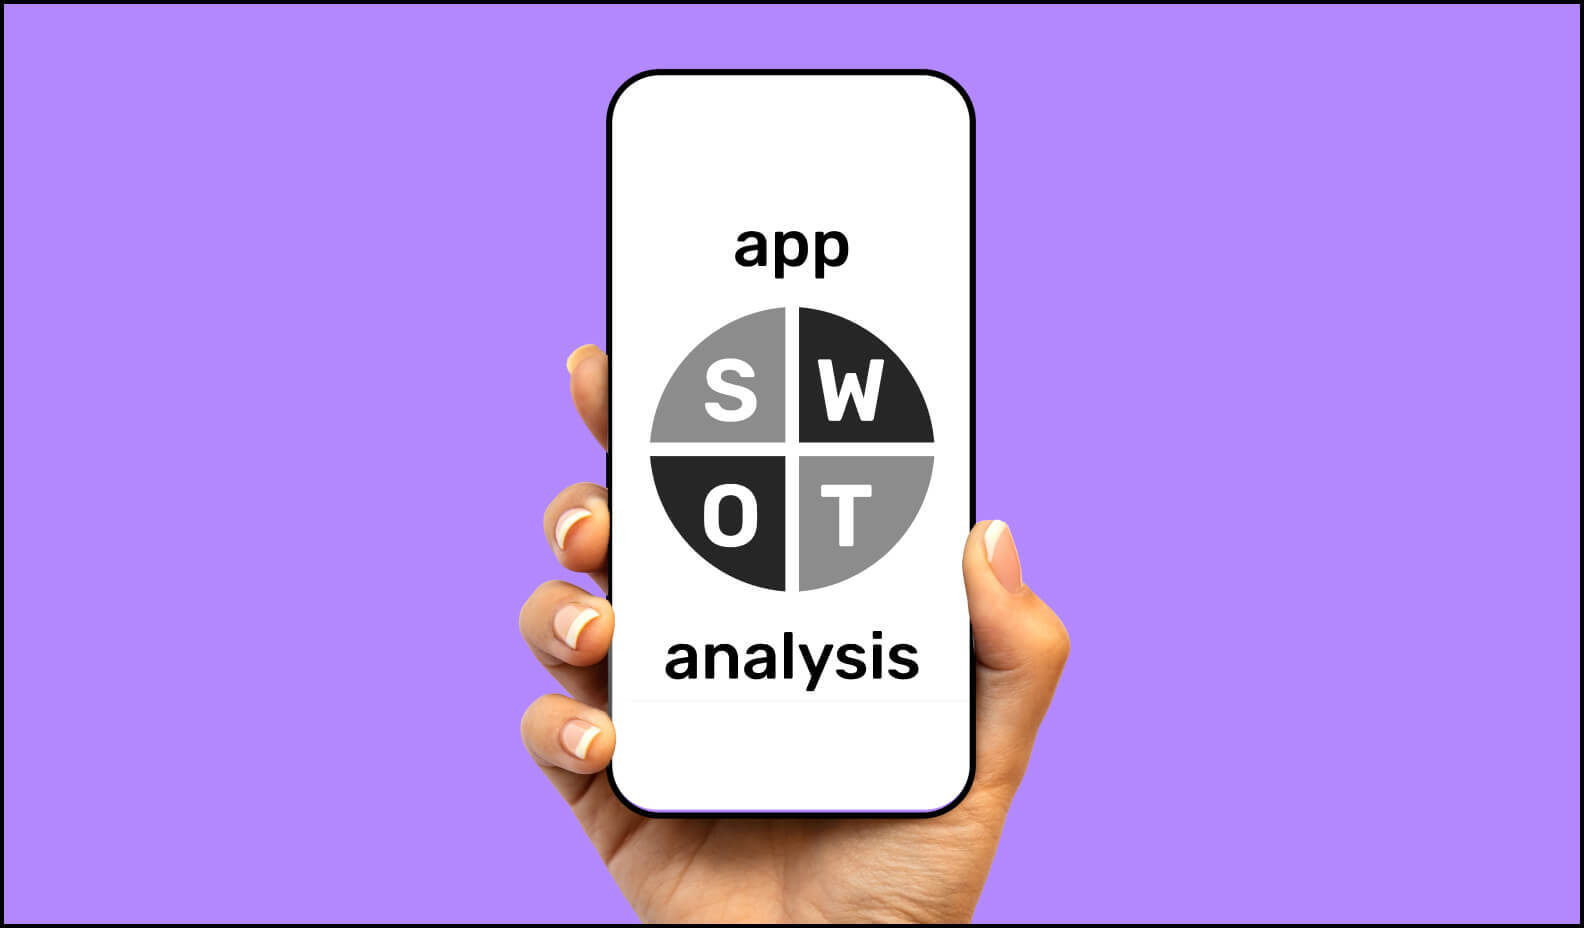 A concept of app SWOT analysis having a mobile phone in hand